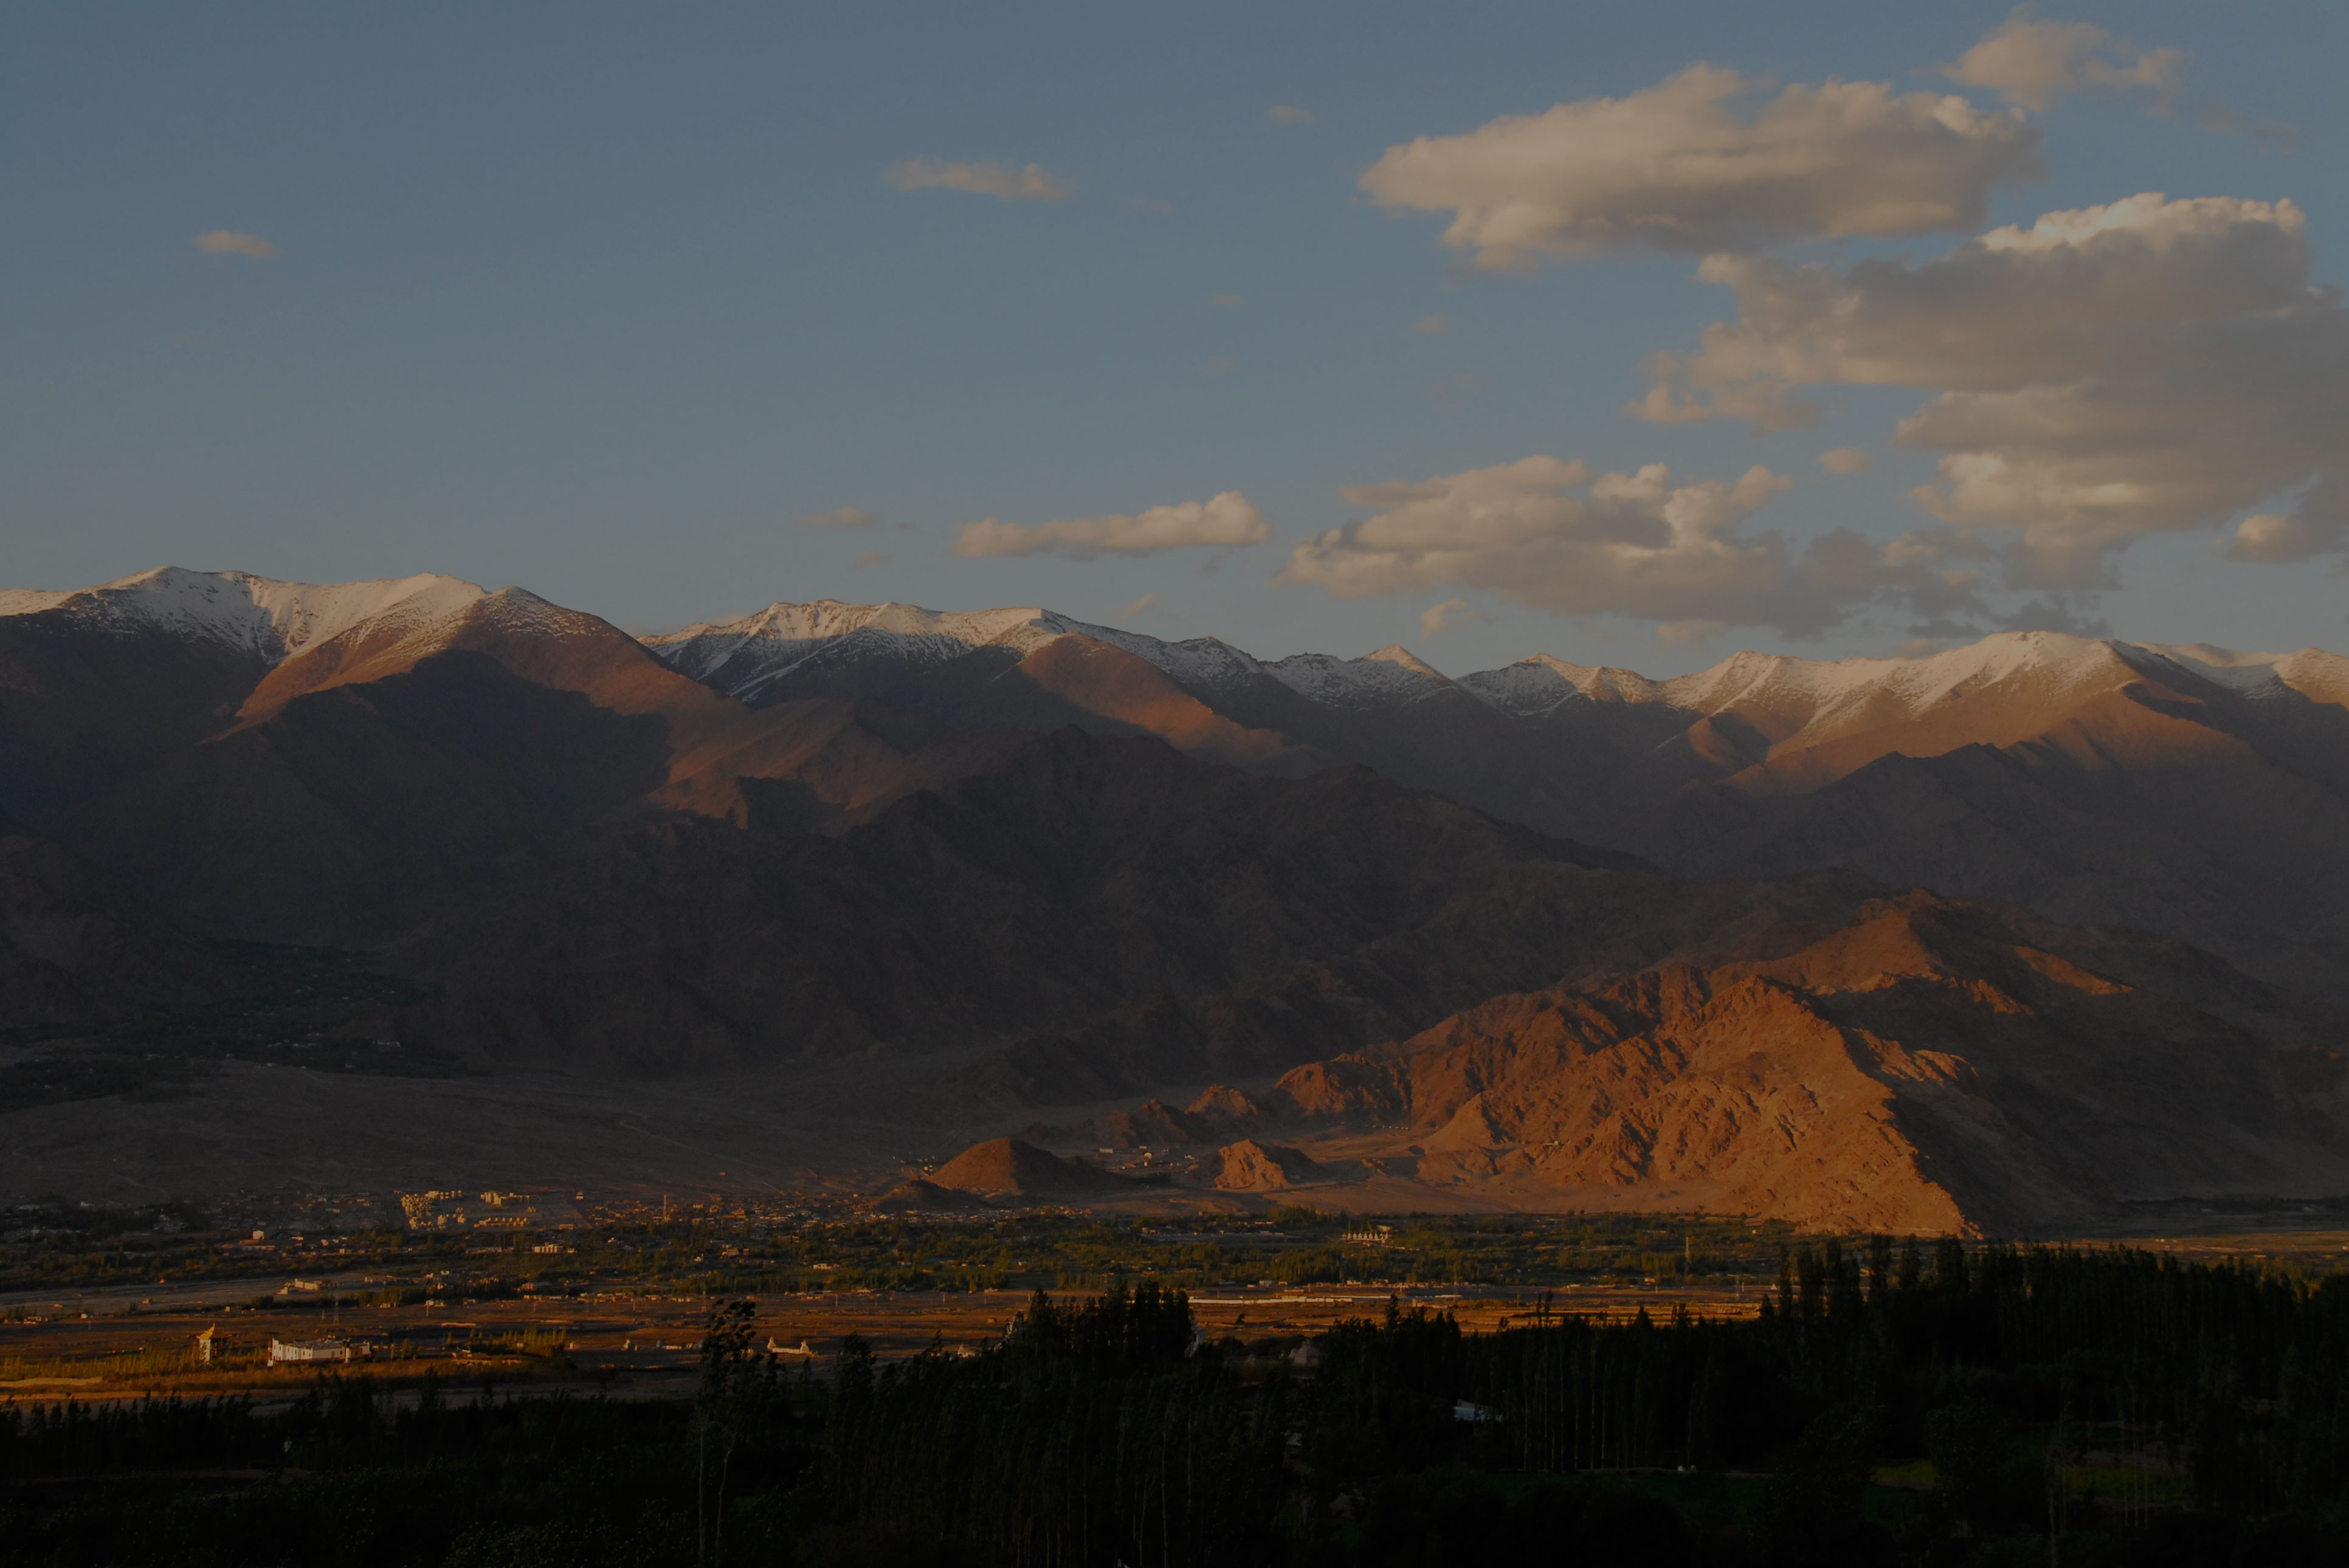 Sunset over the town of Leh, the capital of Ladakh, 1 hour flight from New Delhi